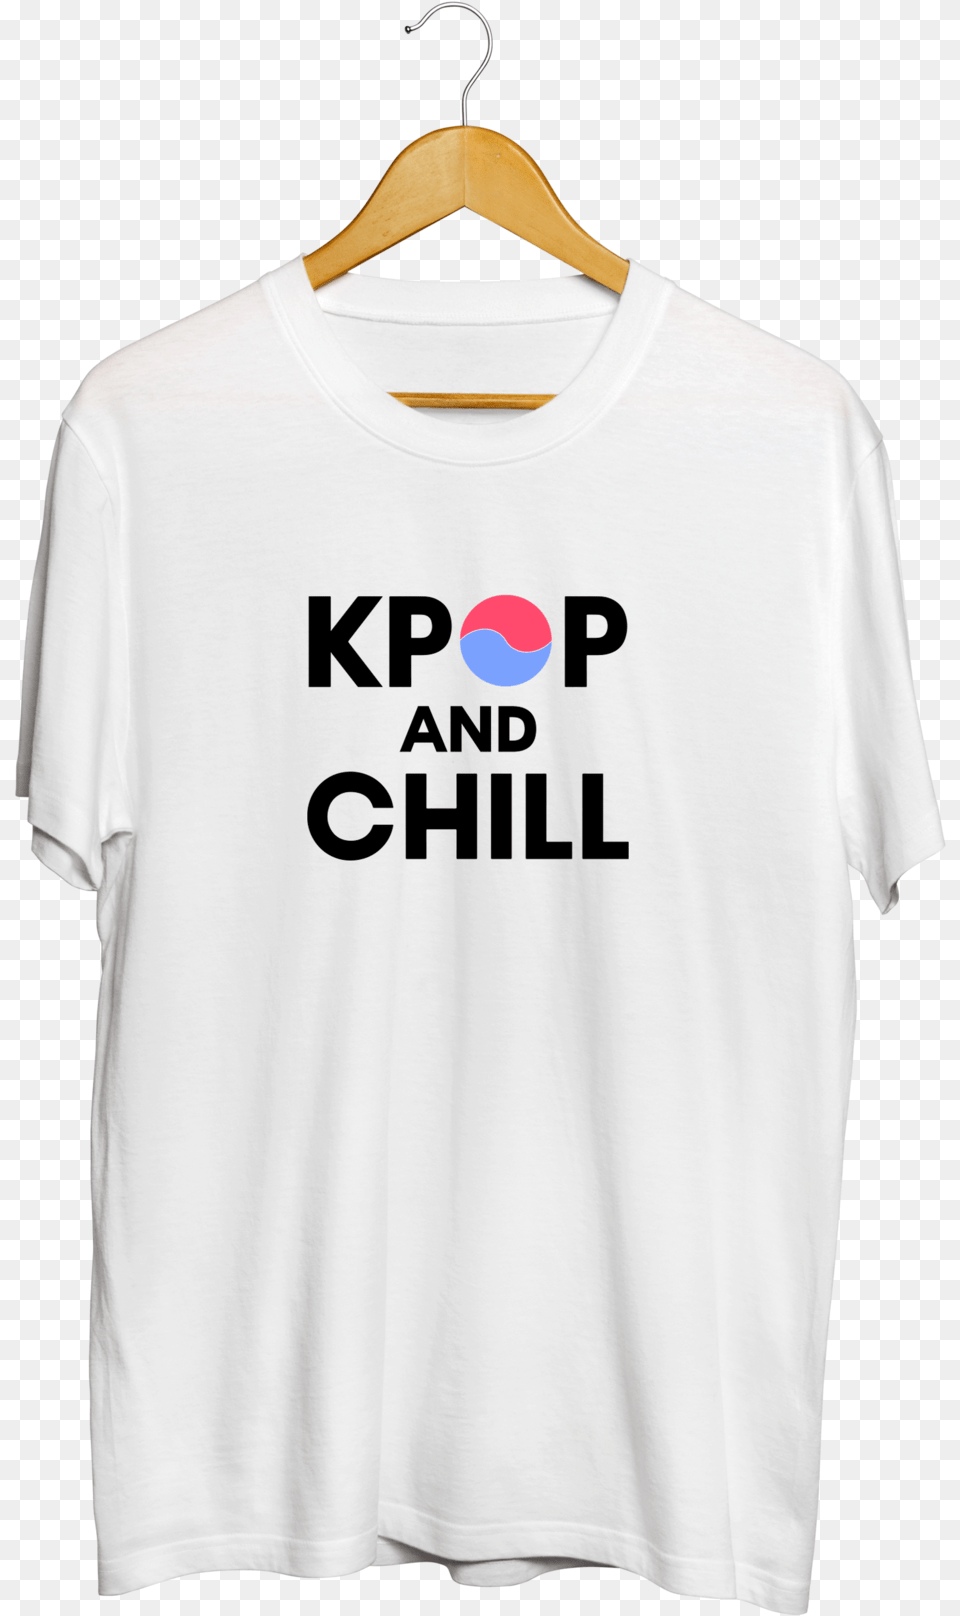 Wwk Kpop And Chill Korean Flag T Shirt Funny Boo Y39all Halloween Shirt Boo Halloween Costume, Clothing, T-shirt, Adult, Male Png